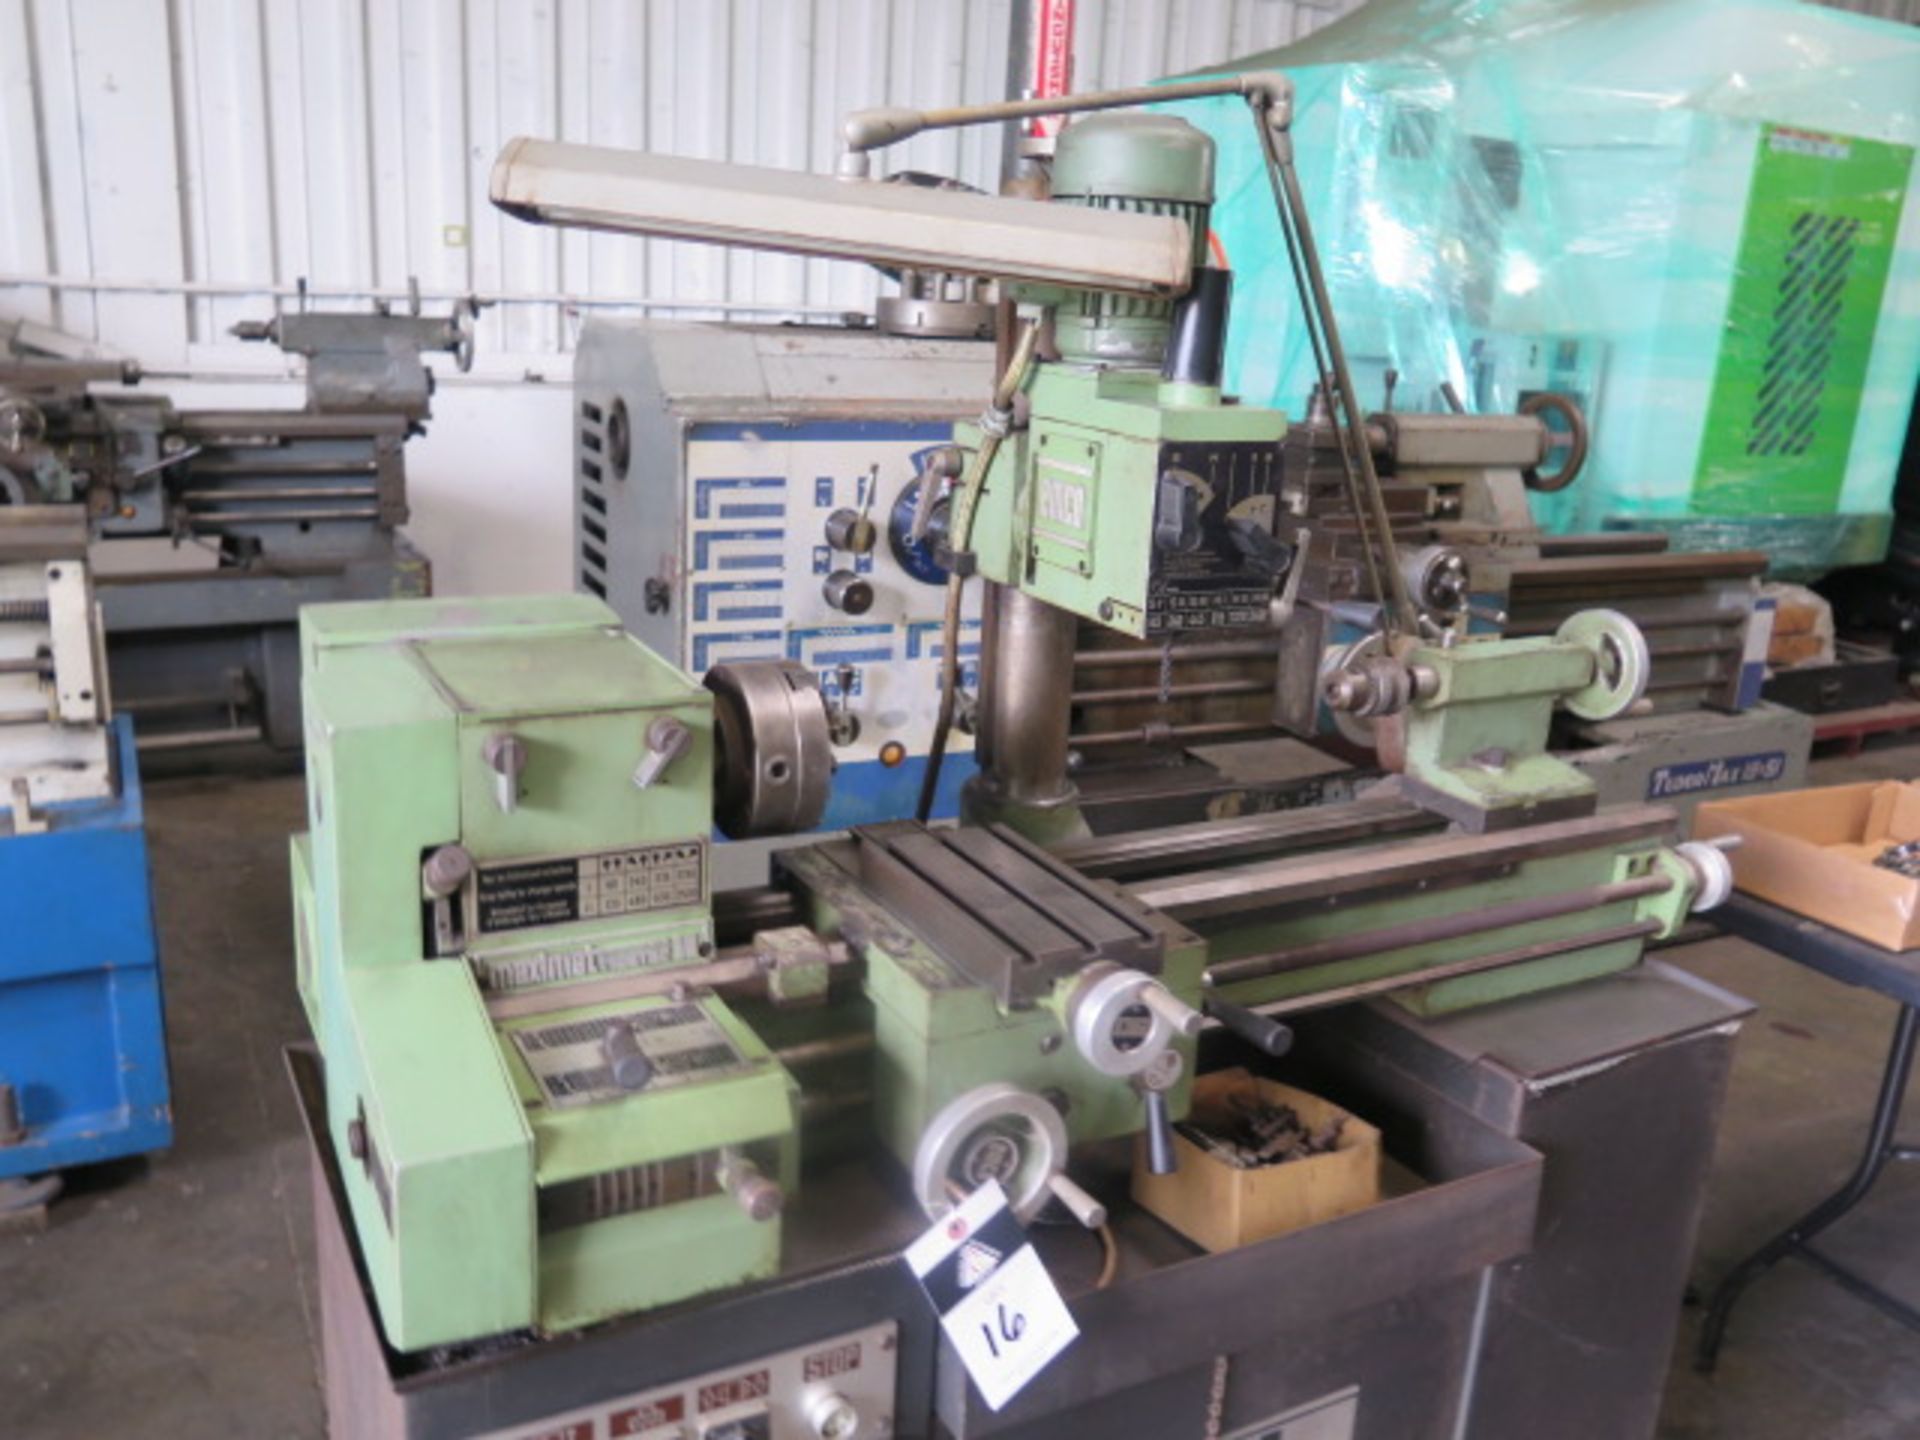 Emco “Maximat Mentor 10” Mill / Drill Machine w/ 60-2500 RPM (SOLD AS-IS - NO WARRANTY) - Image 3 of 16